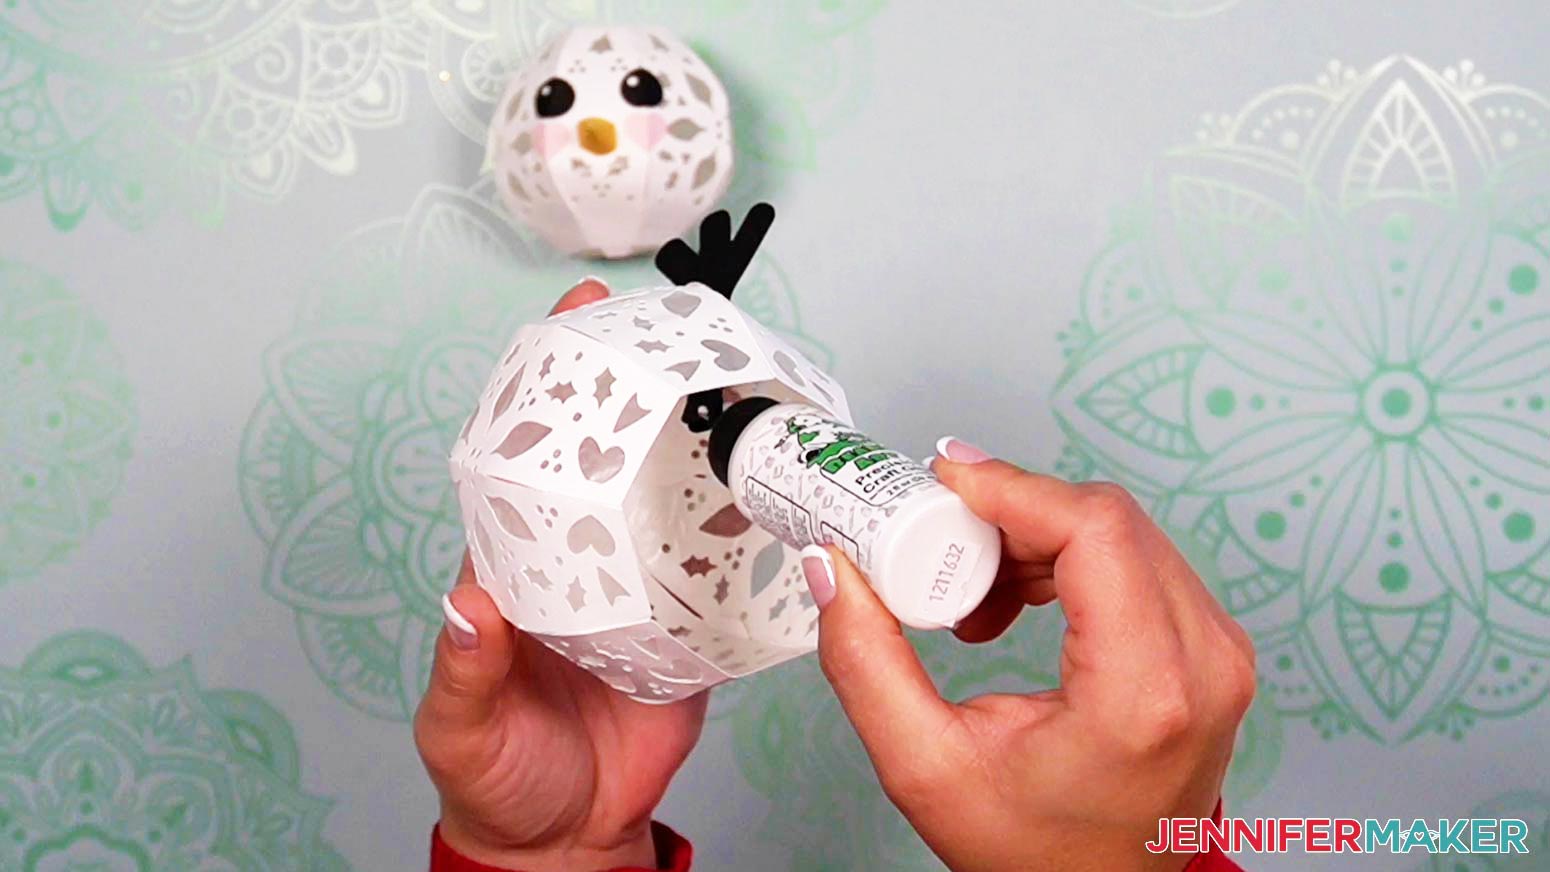 Add glue to the arm tabs inside the body of the light up snowman